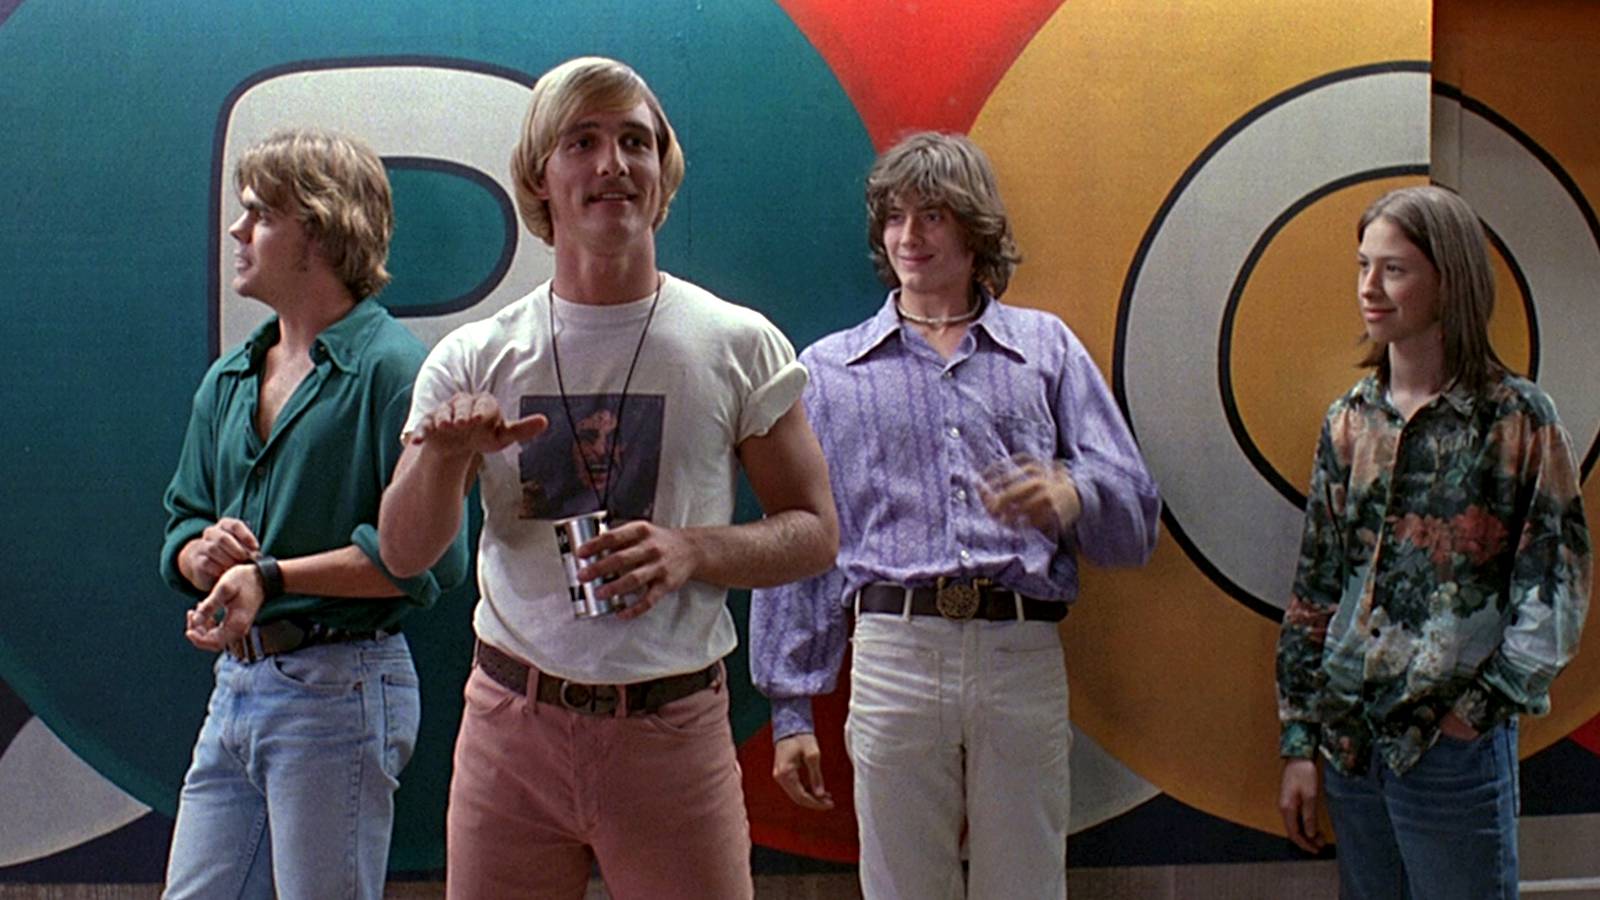 The 15 Best Counterculture Movies of All Time, Ranked